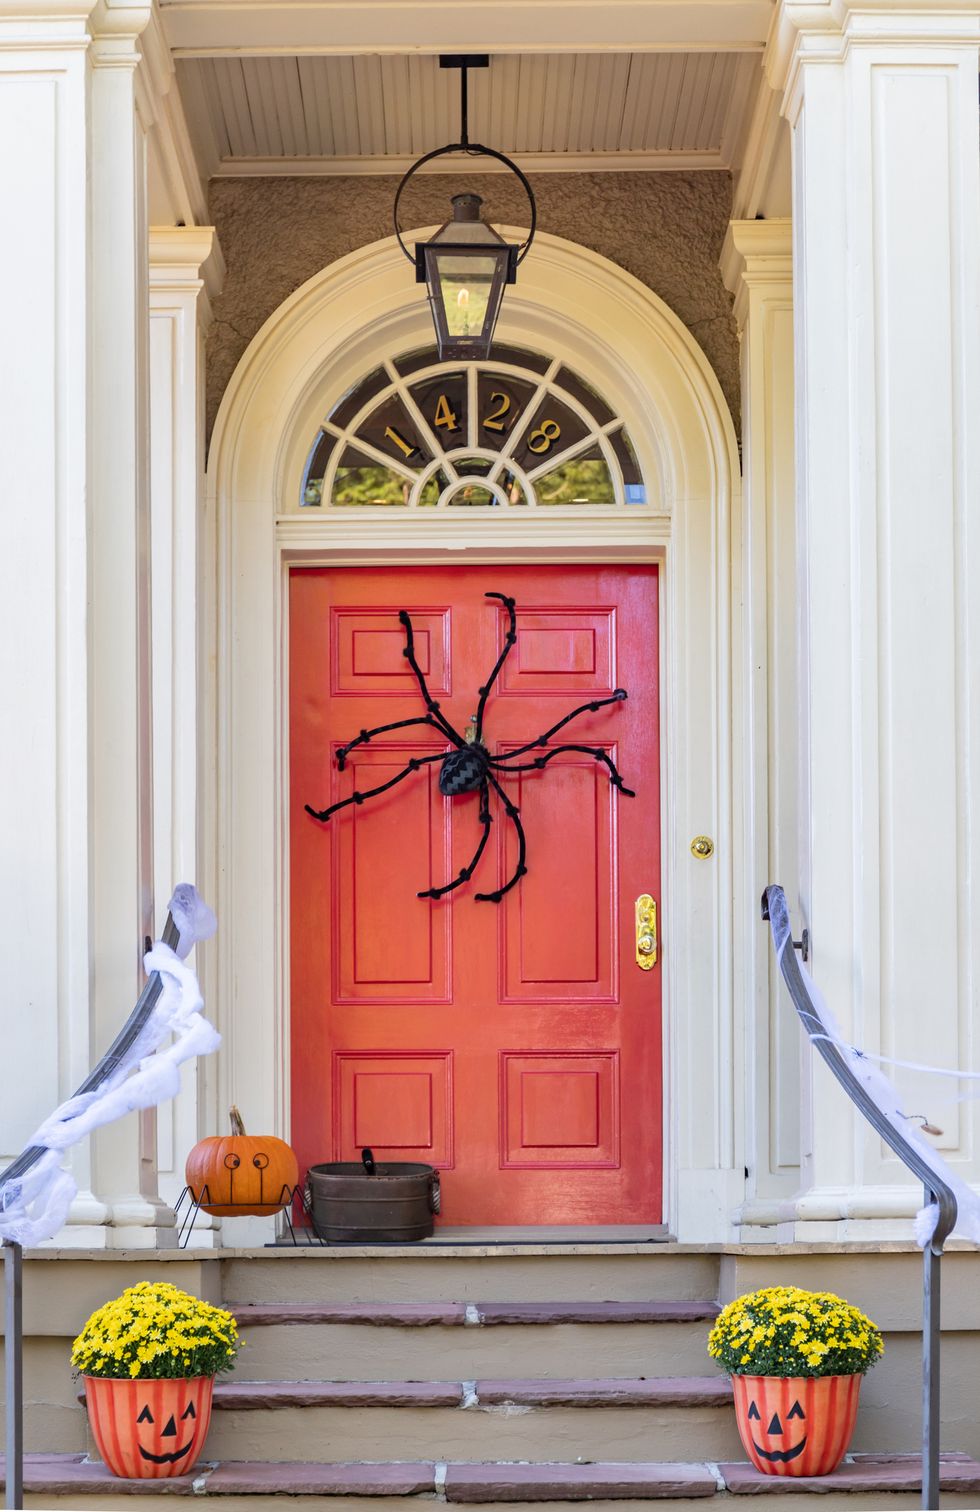 A door decorated for Halloween in the Garden District of New Orleans